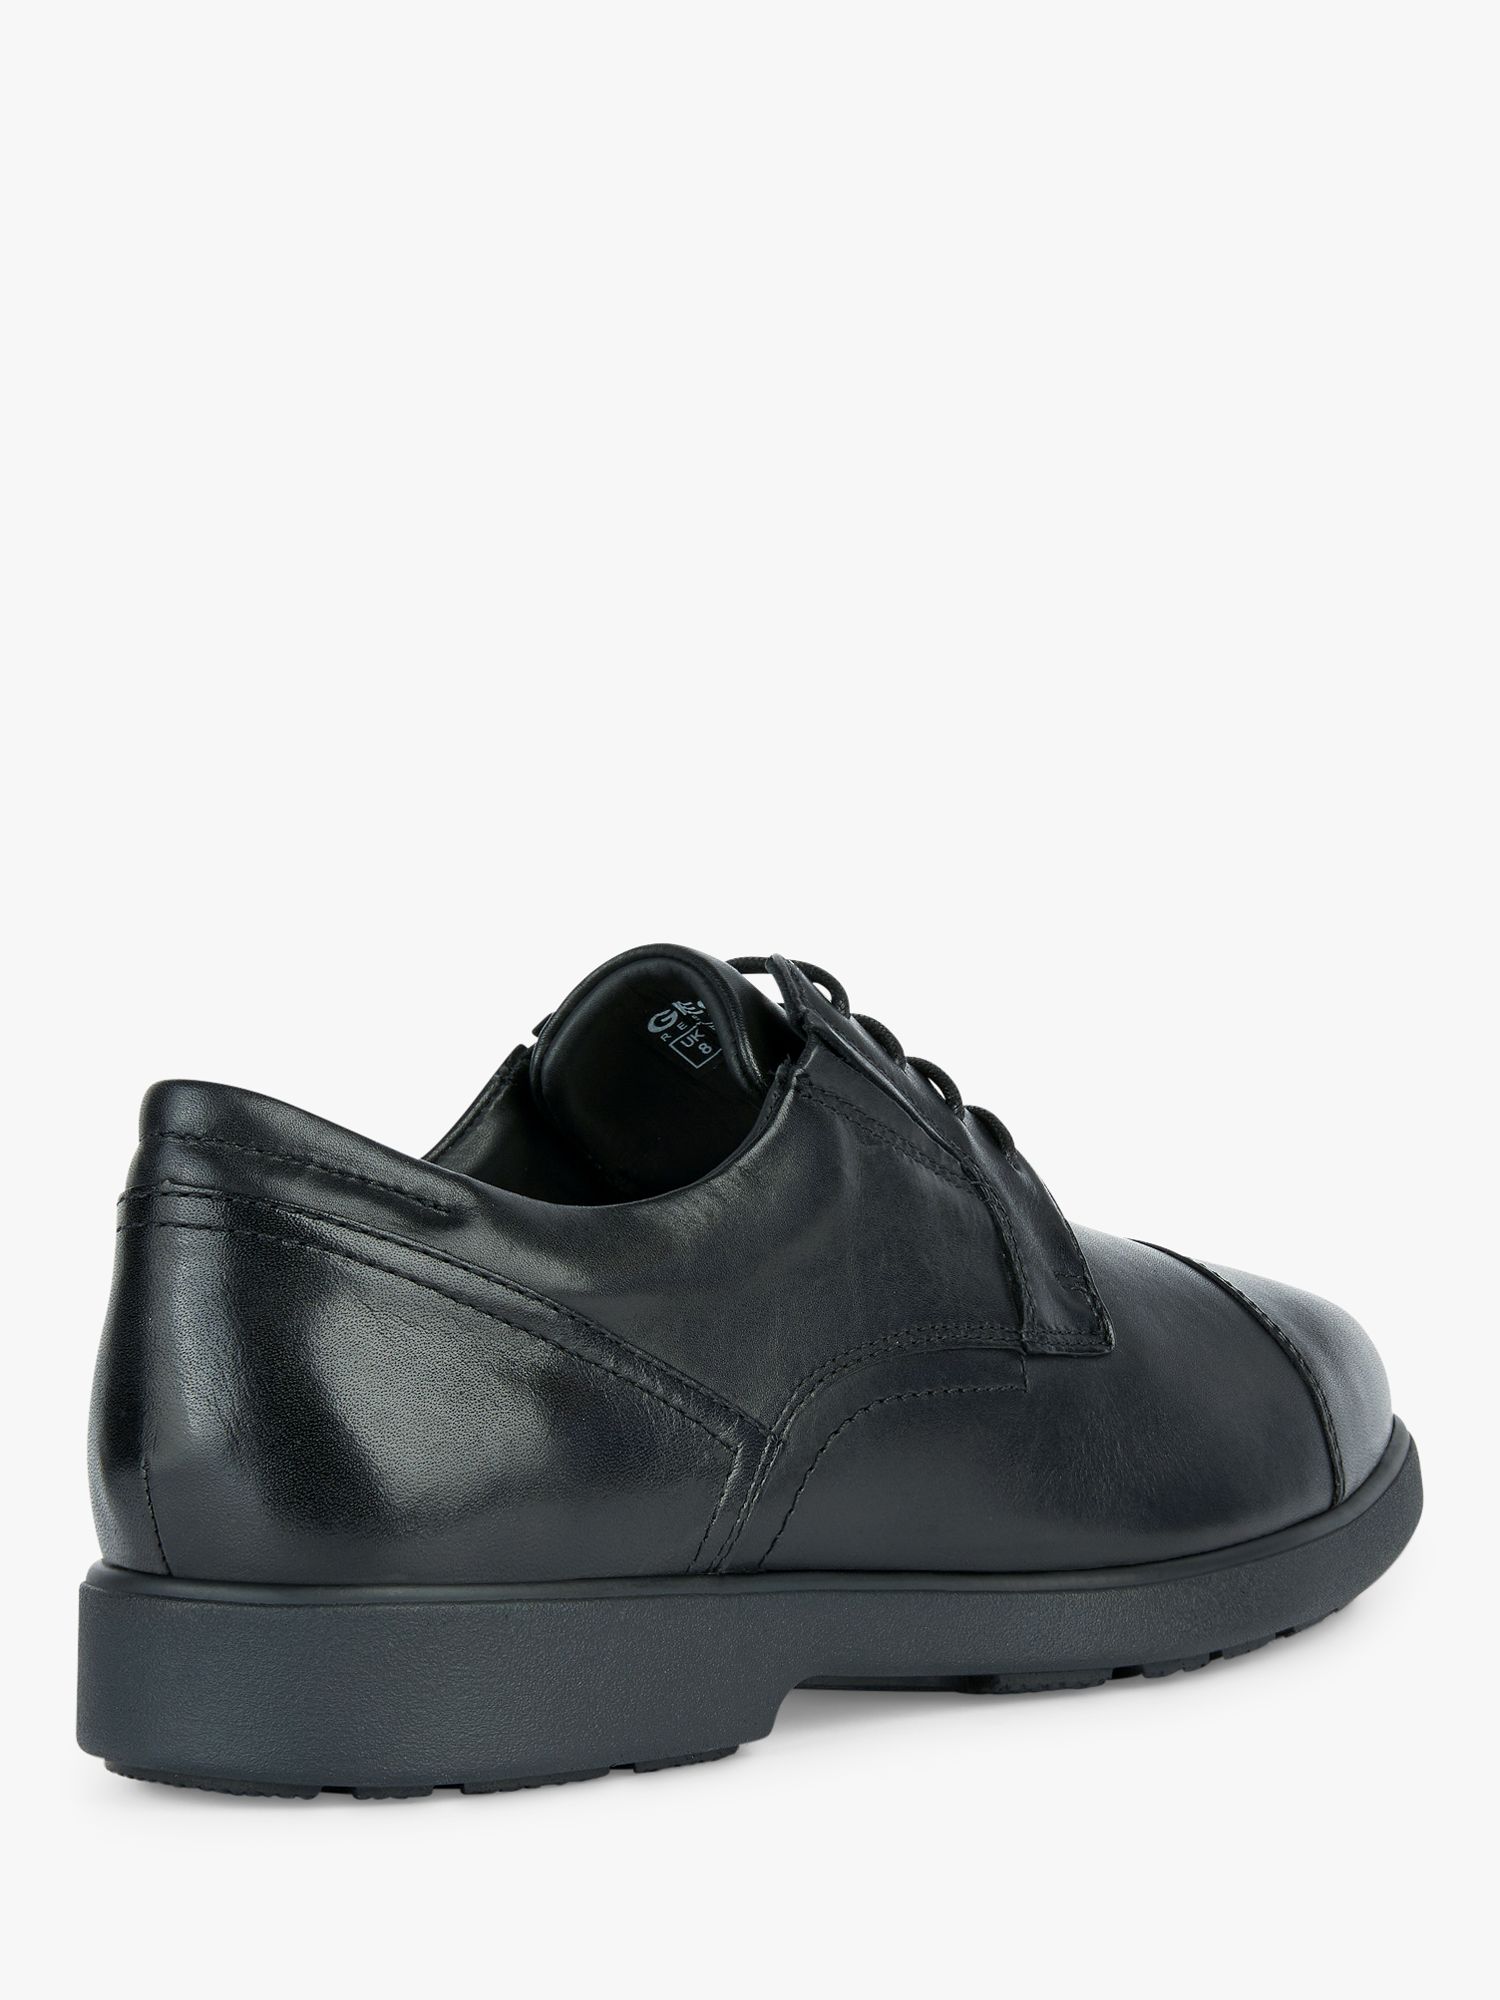 Geox Spherica EC11 Leather Oxford Shoes, Black at John Lewis & Partners